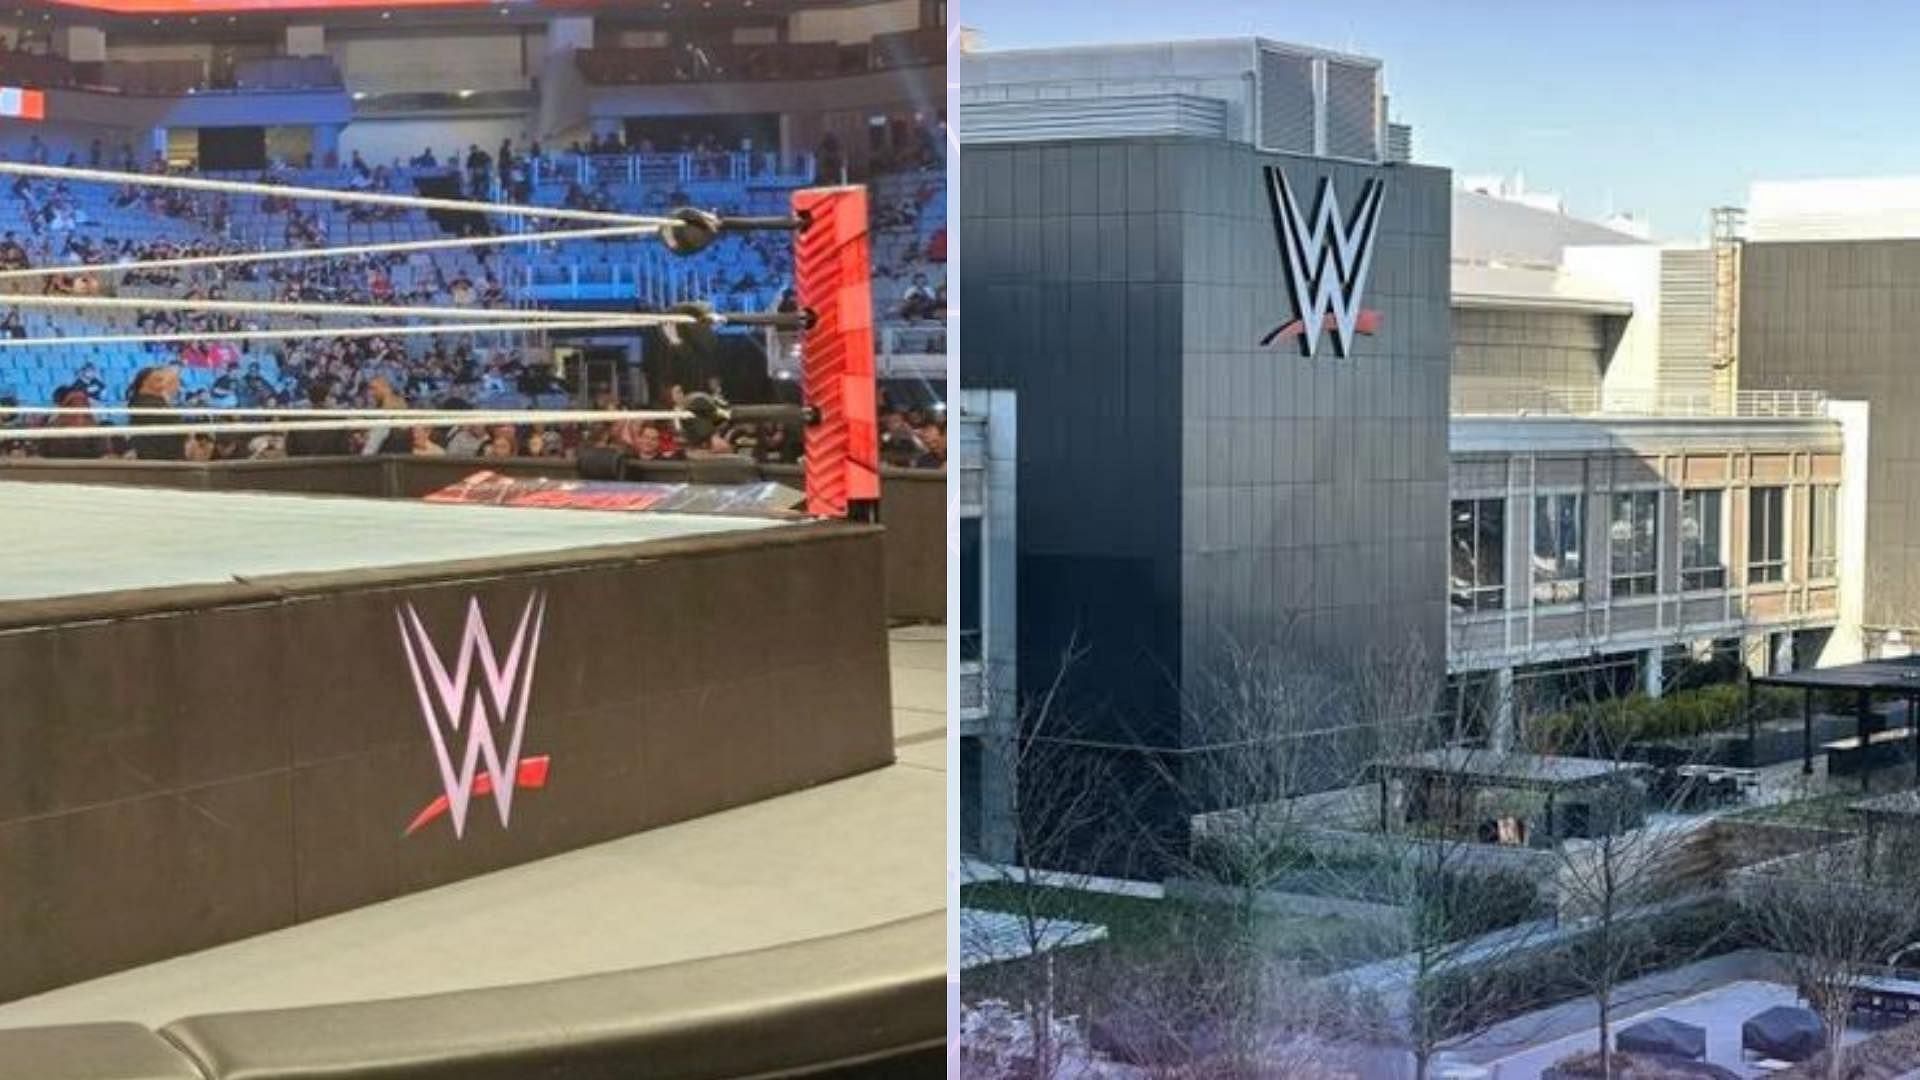 WWE headquarters and ring